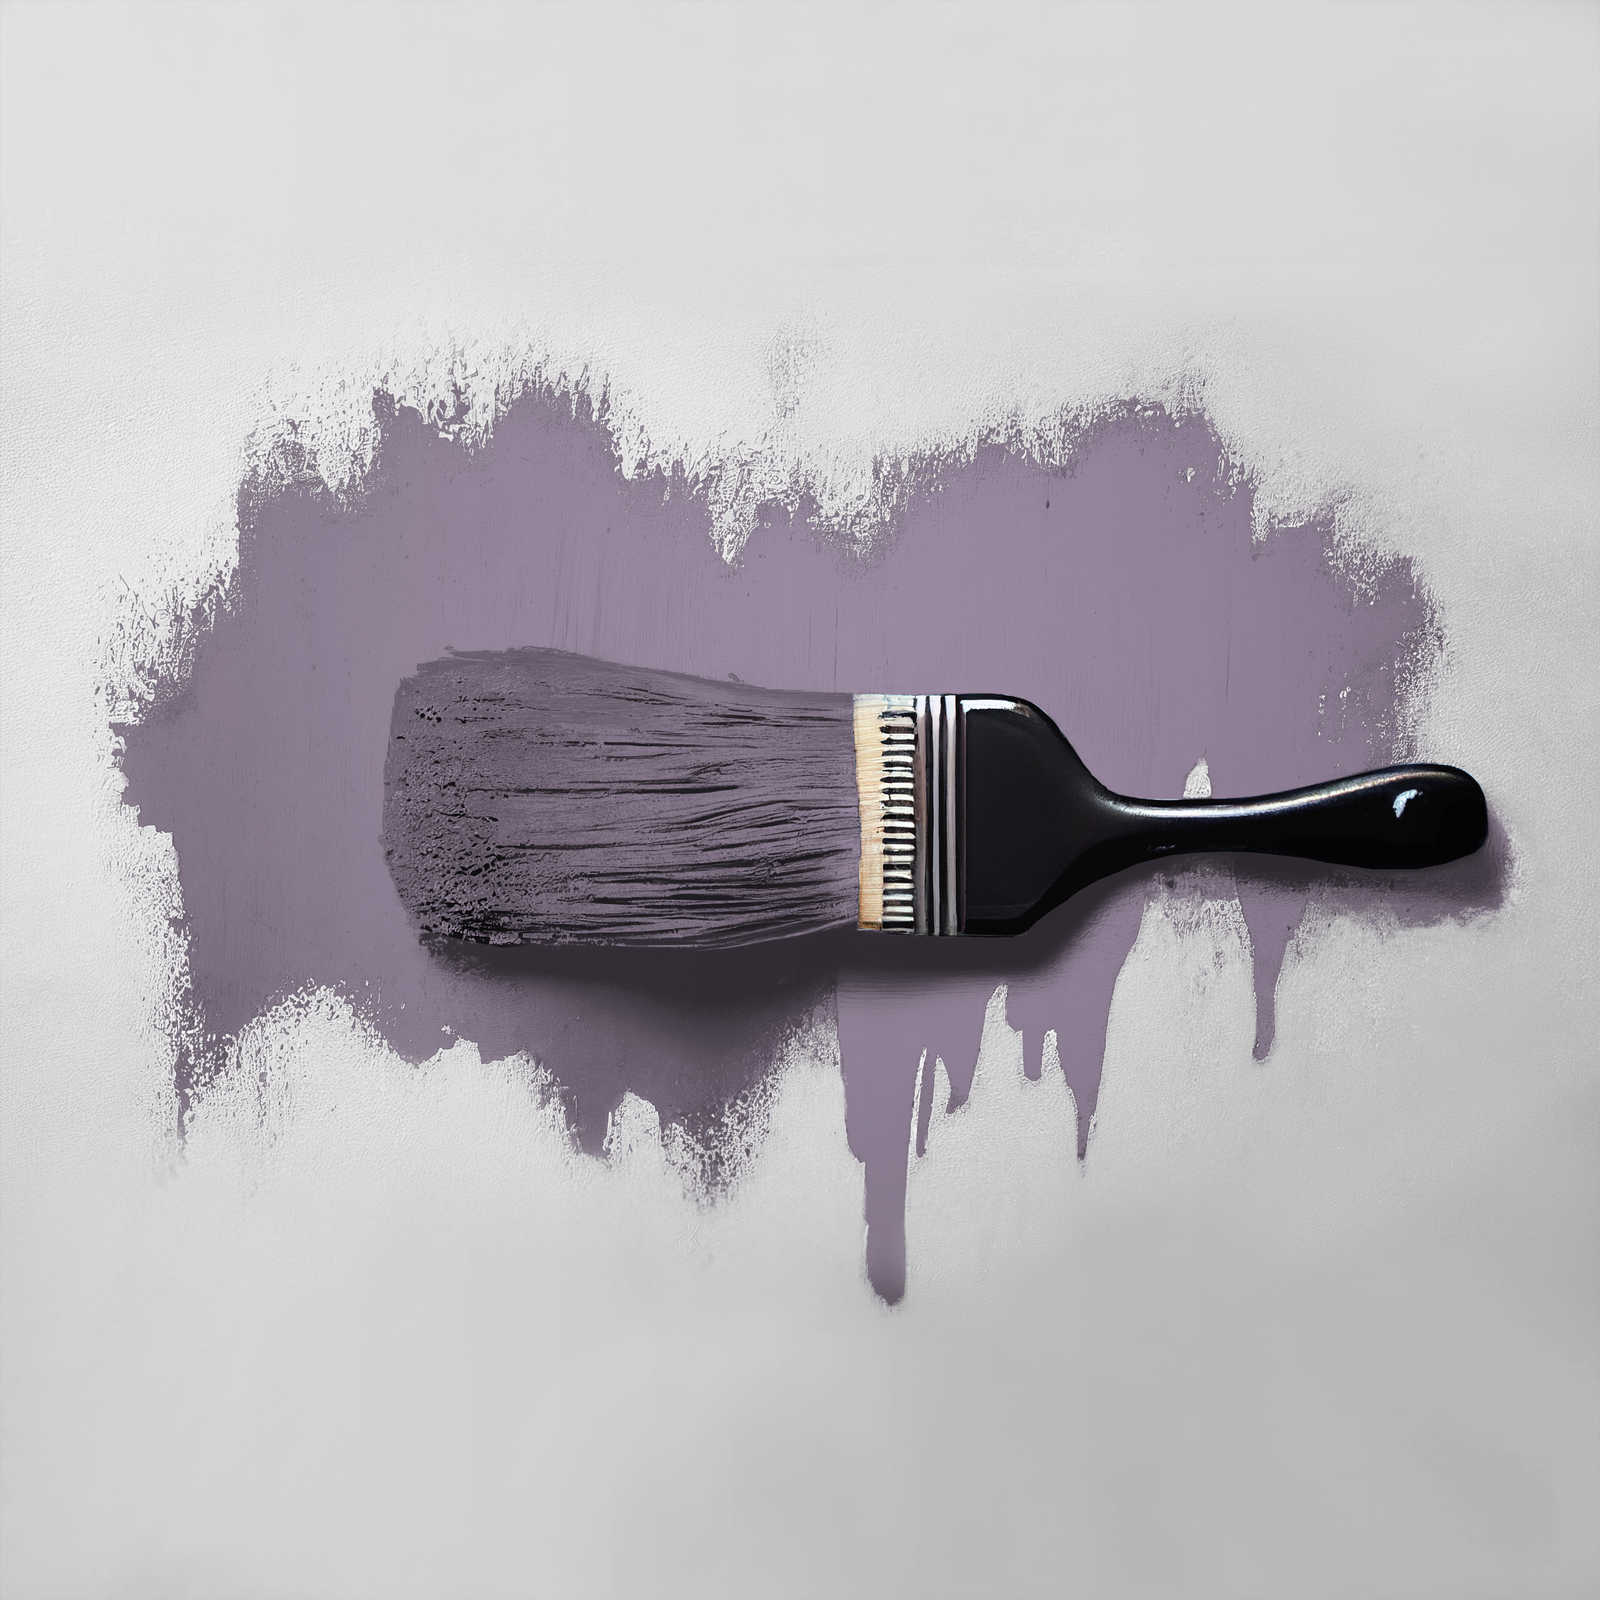             Wall Paint TCK2006 »Artful Aubergine« in strong violet – 5,0 litre
        